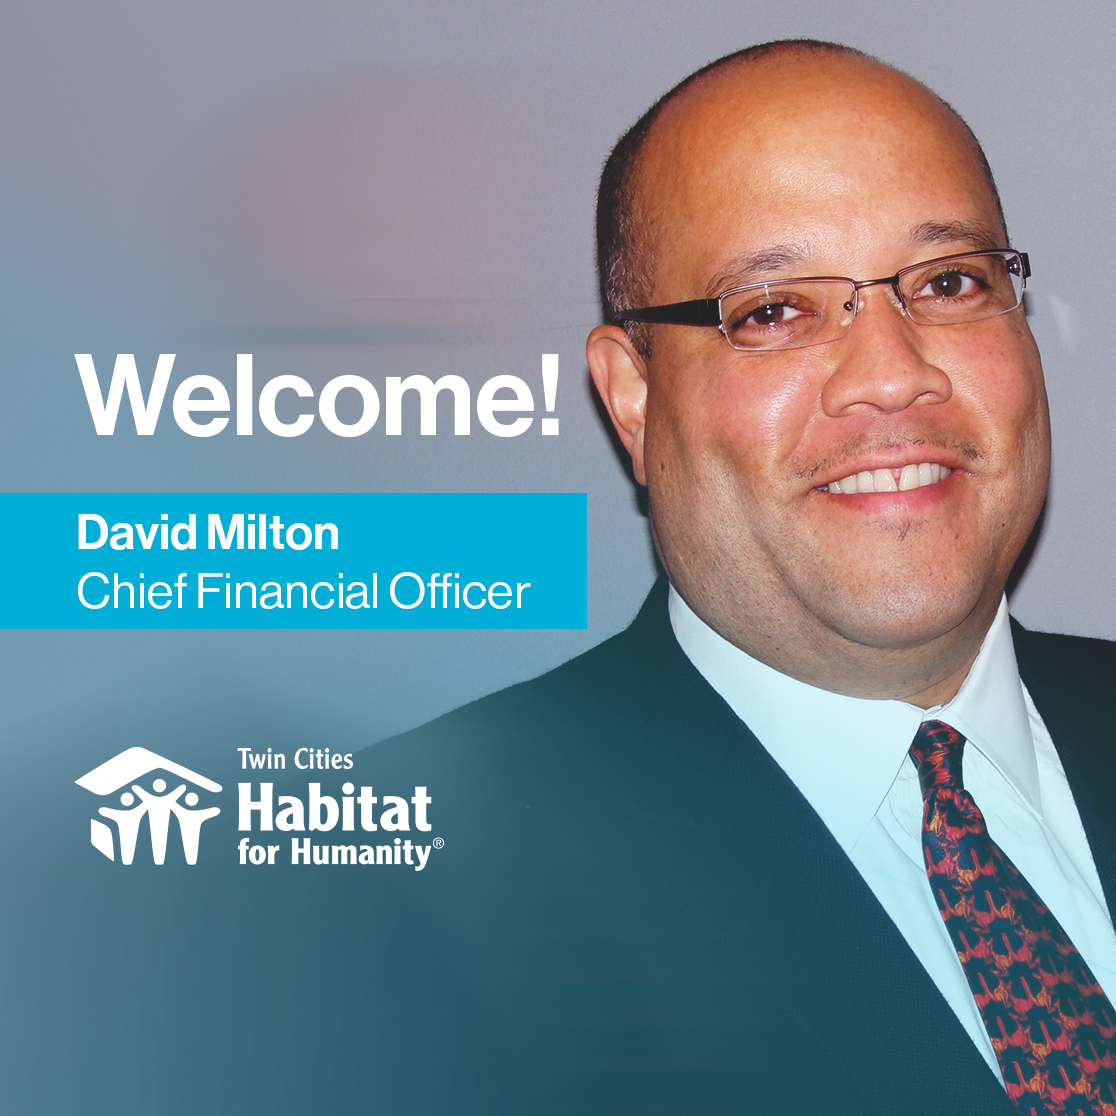 Welcoming David Milton, Chief Financial Officer